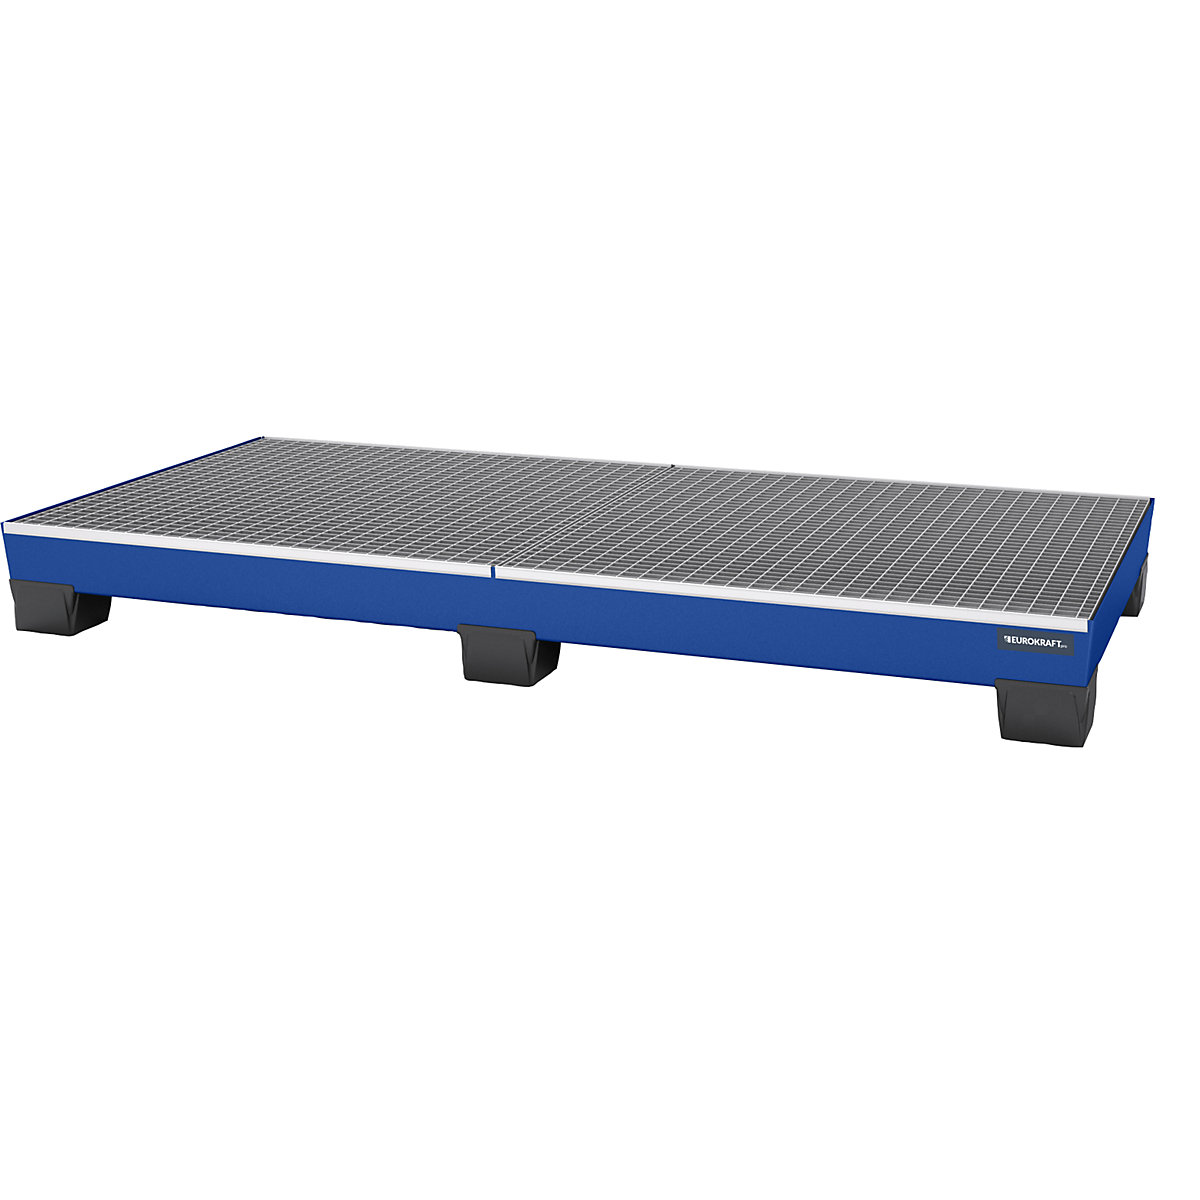 Steel sump tray with plastic feet – eurokraft pro, LxWxH 2460 x 1210 x 260 mm, blue, with grate-5